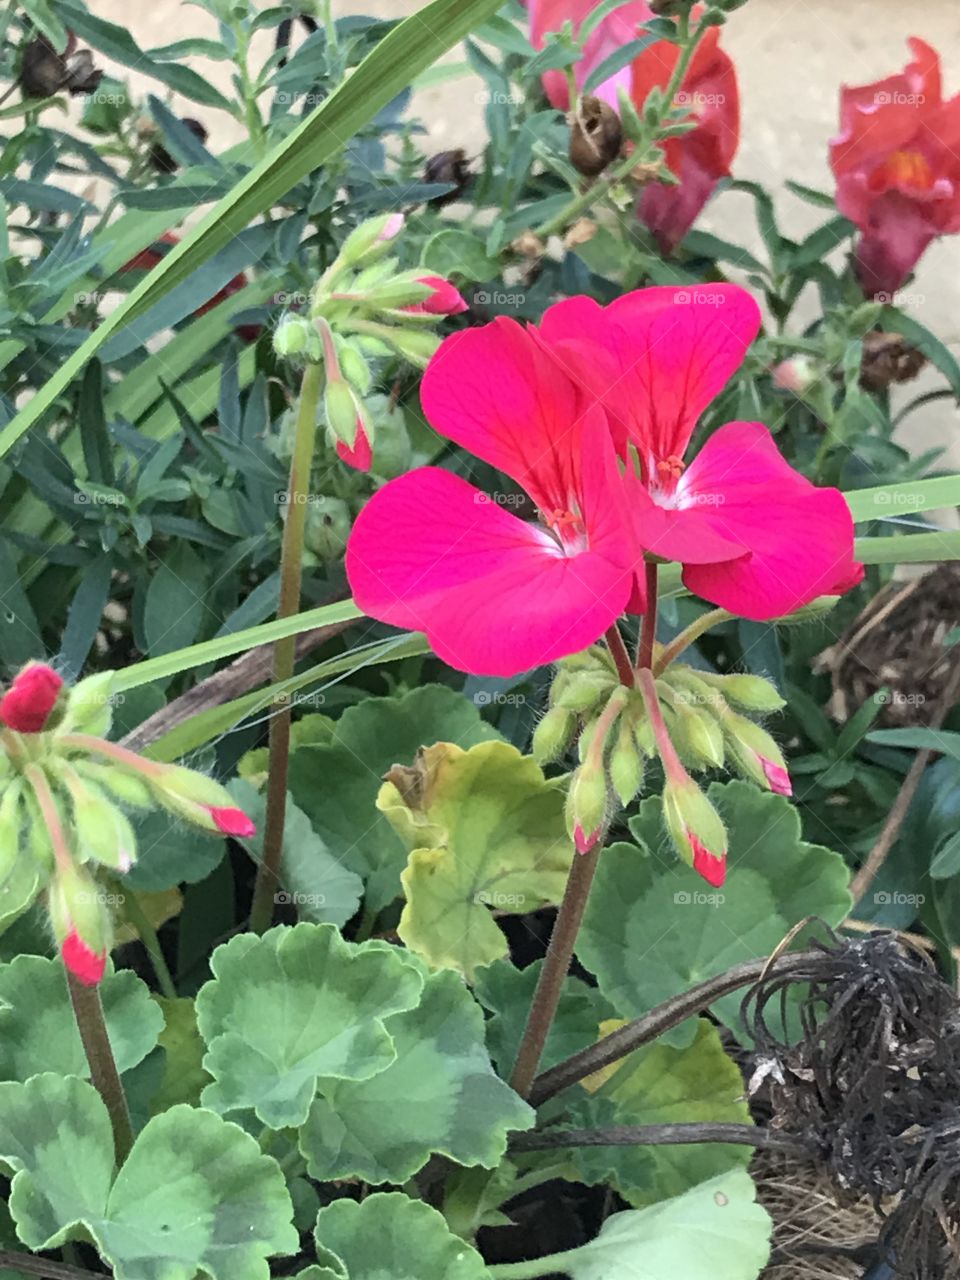 Hot pink Geraniums just starting to bloom.